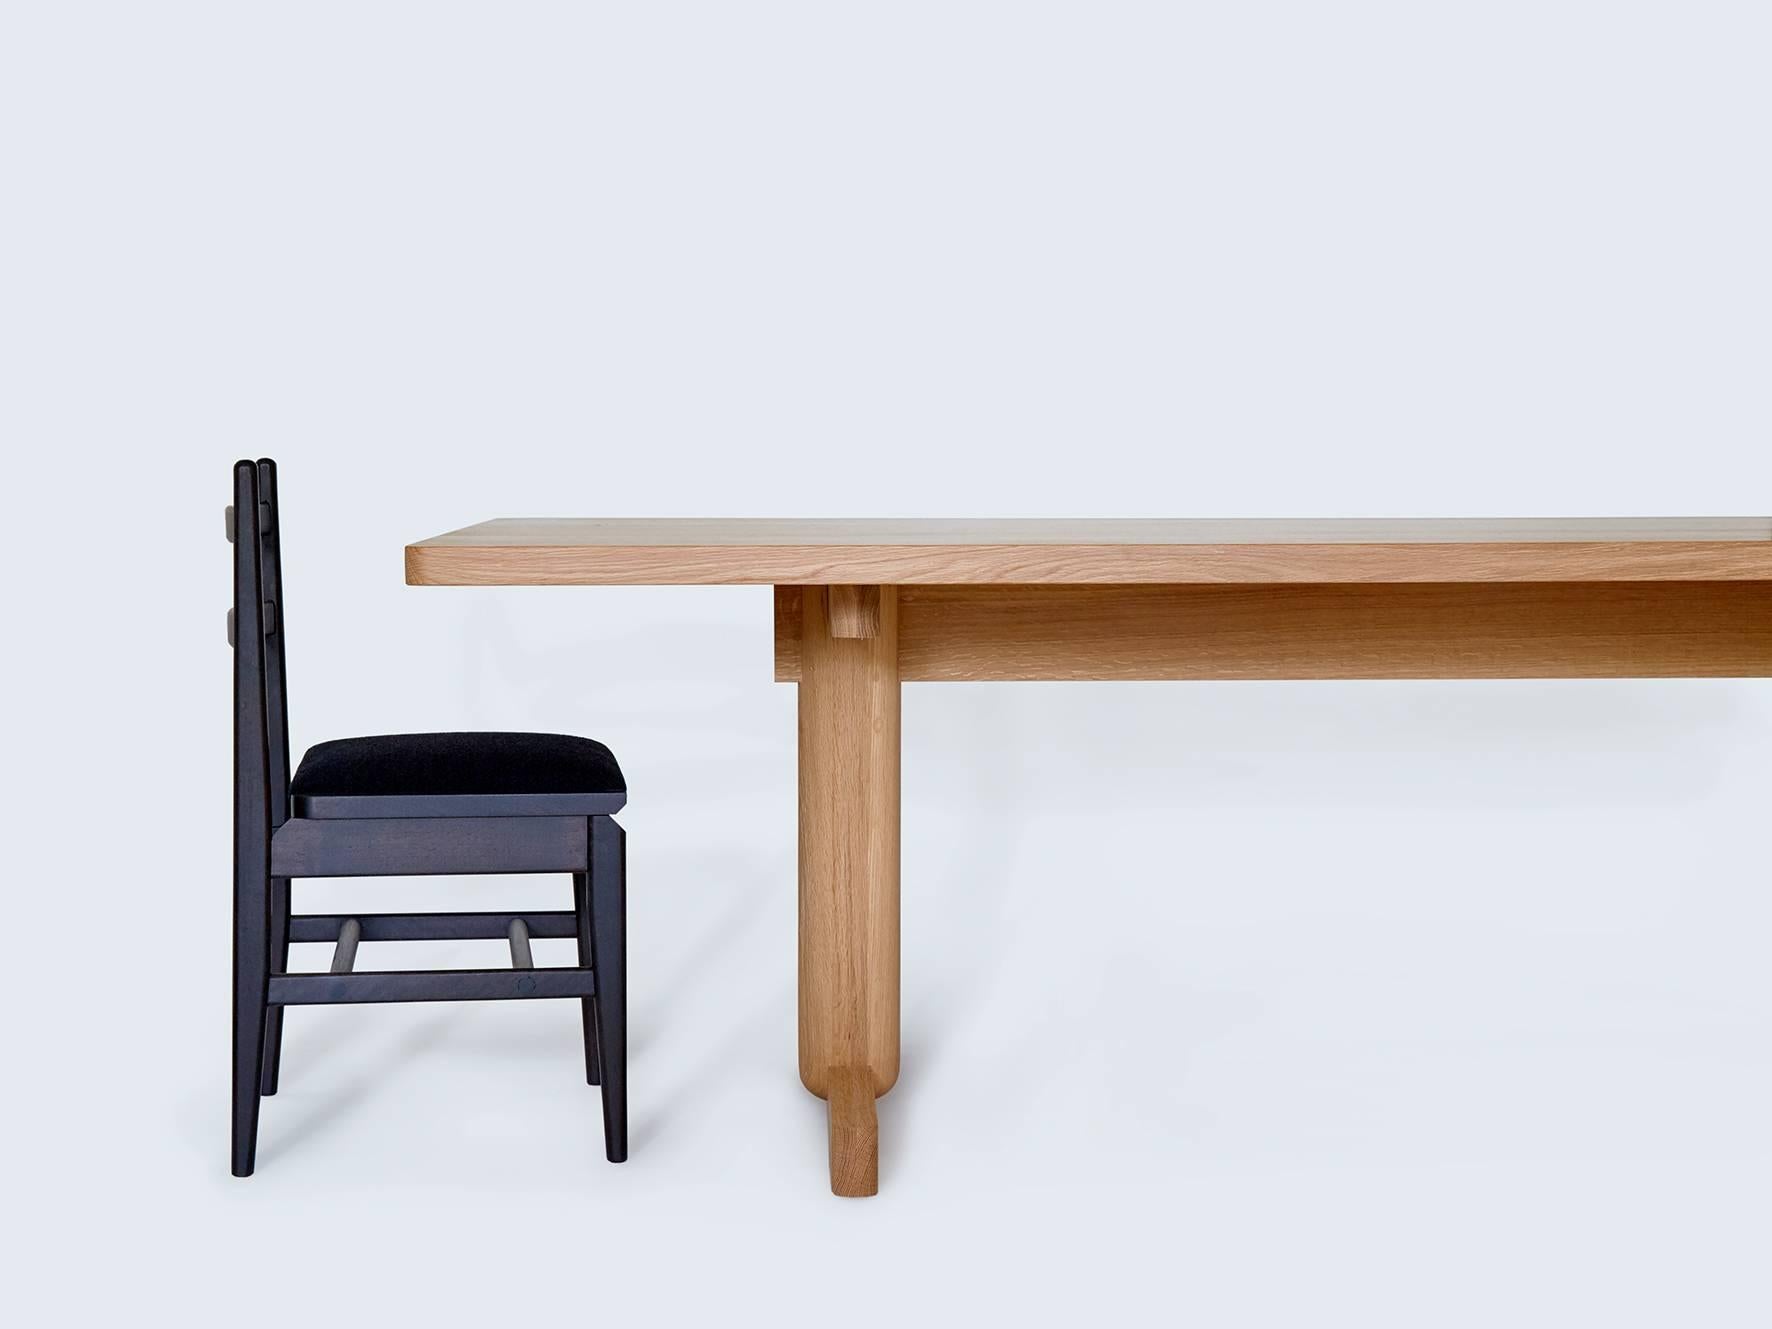 The Olmsted dining table is a contemporary trestle table that is handcrafted on a made-to-order basis. Influenced by simple Shaker tables, it features oversized turned legs.

It is available in Claro walnut, black walnut (natural, ebonized or